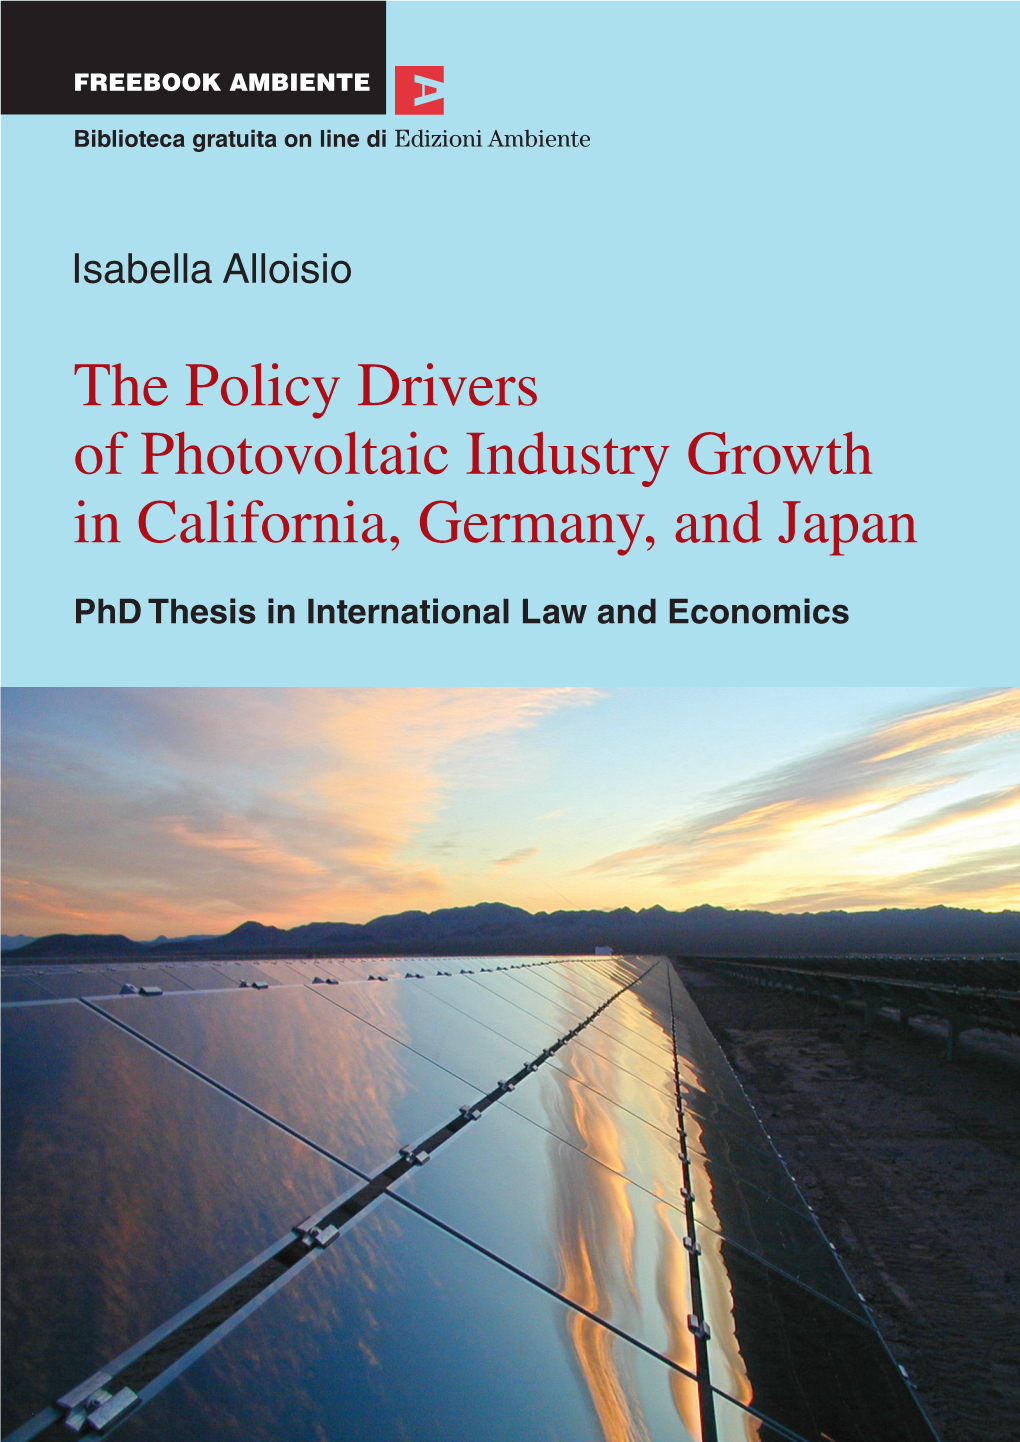 The Policy Drivers of Photovoltaic Industry Growth in California, Germany, and Japan